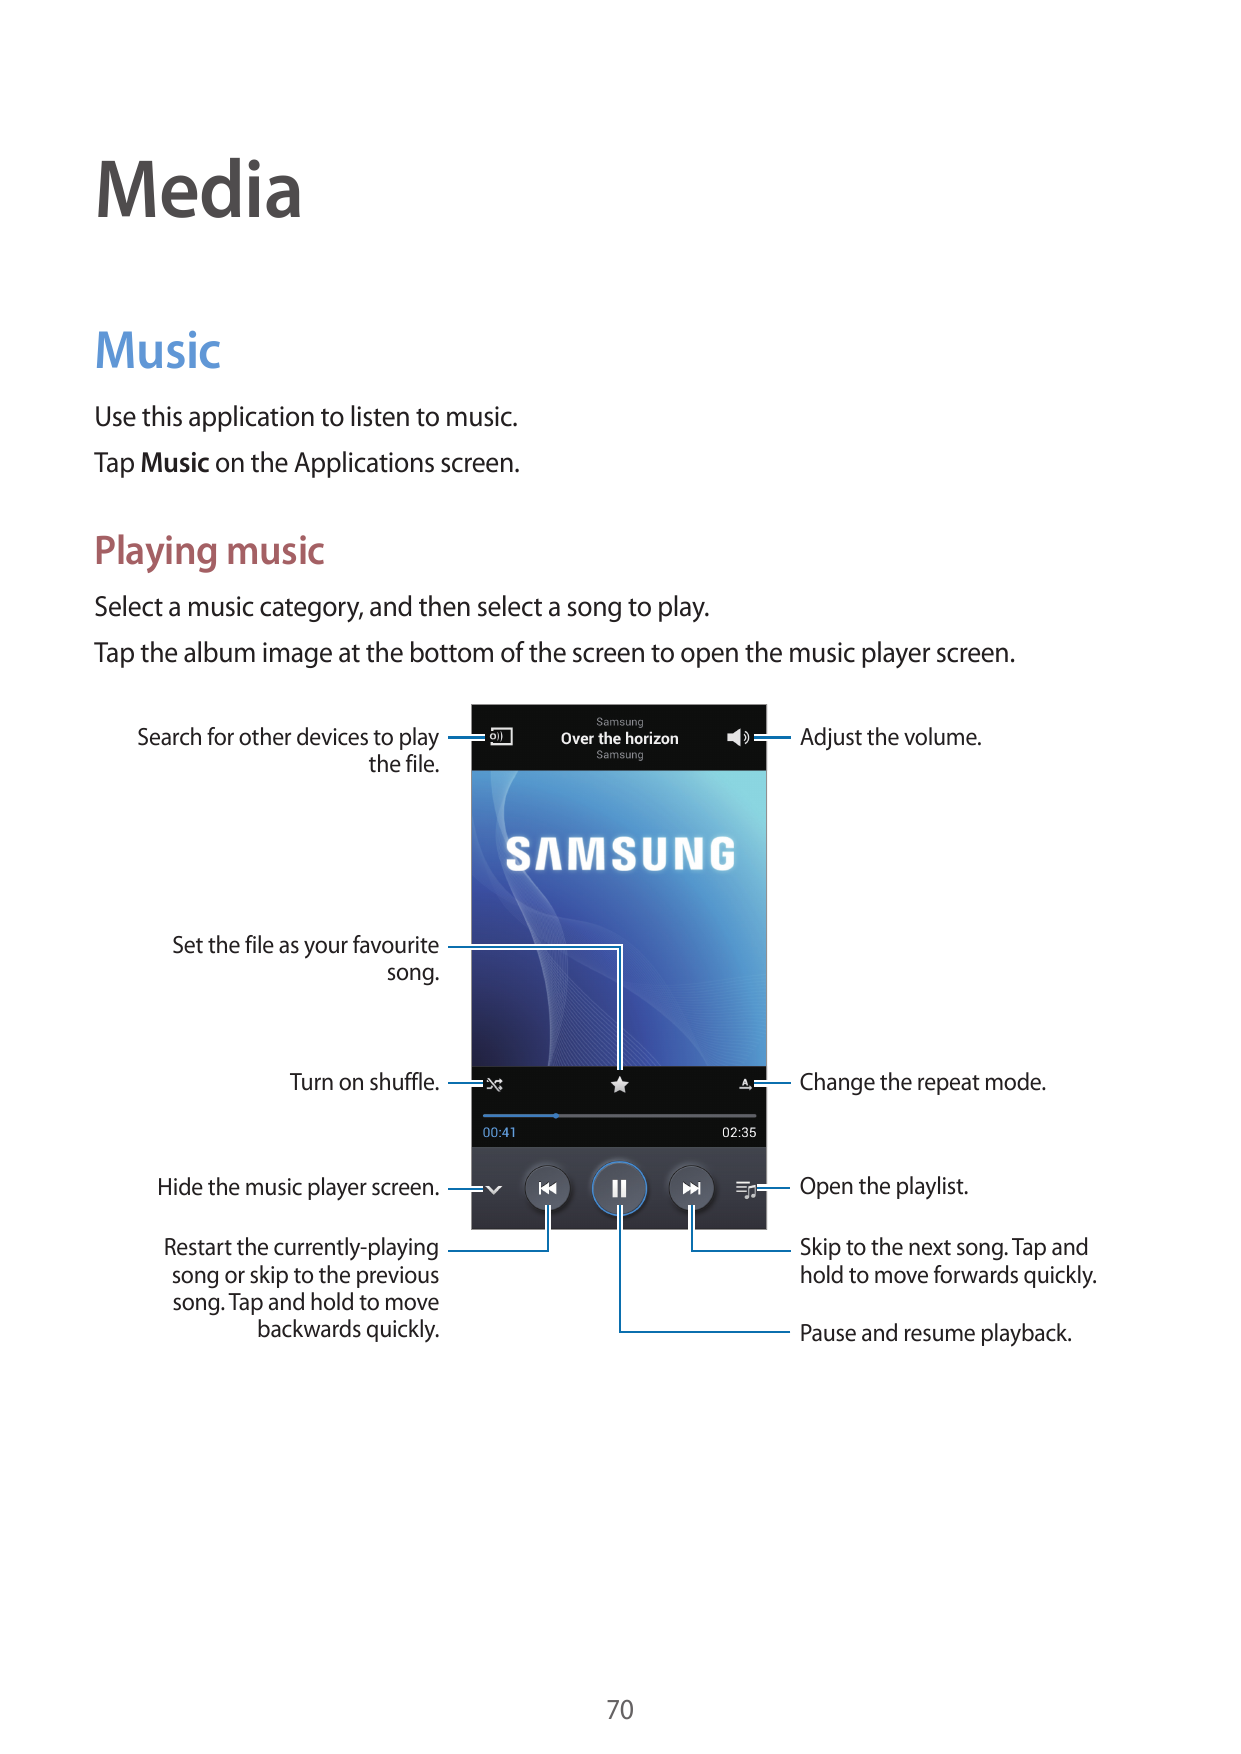 MediaMusicUse this application to listen to music.Tap Music on the Applications screen.Playing musicSelect a music category, and